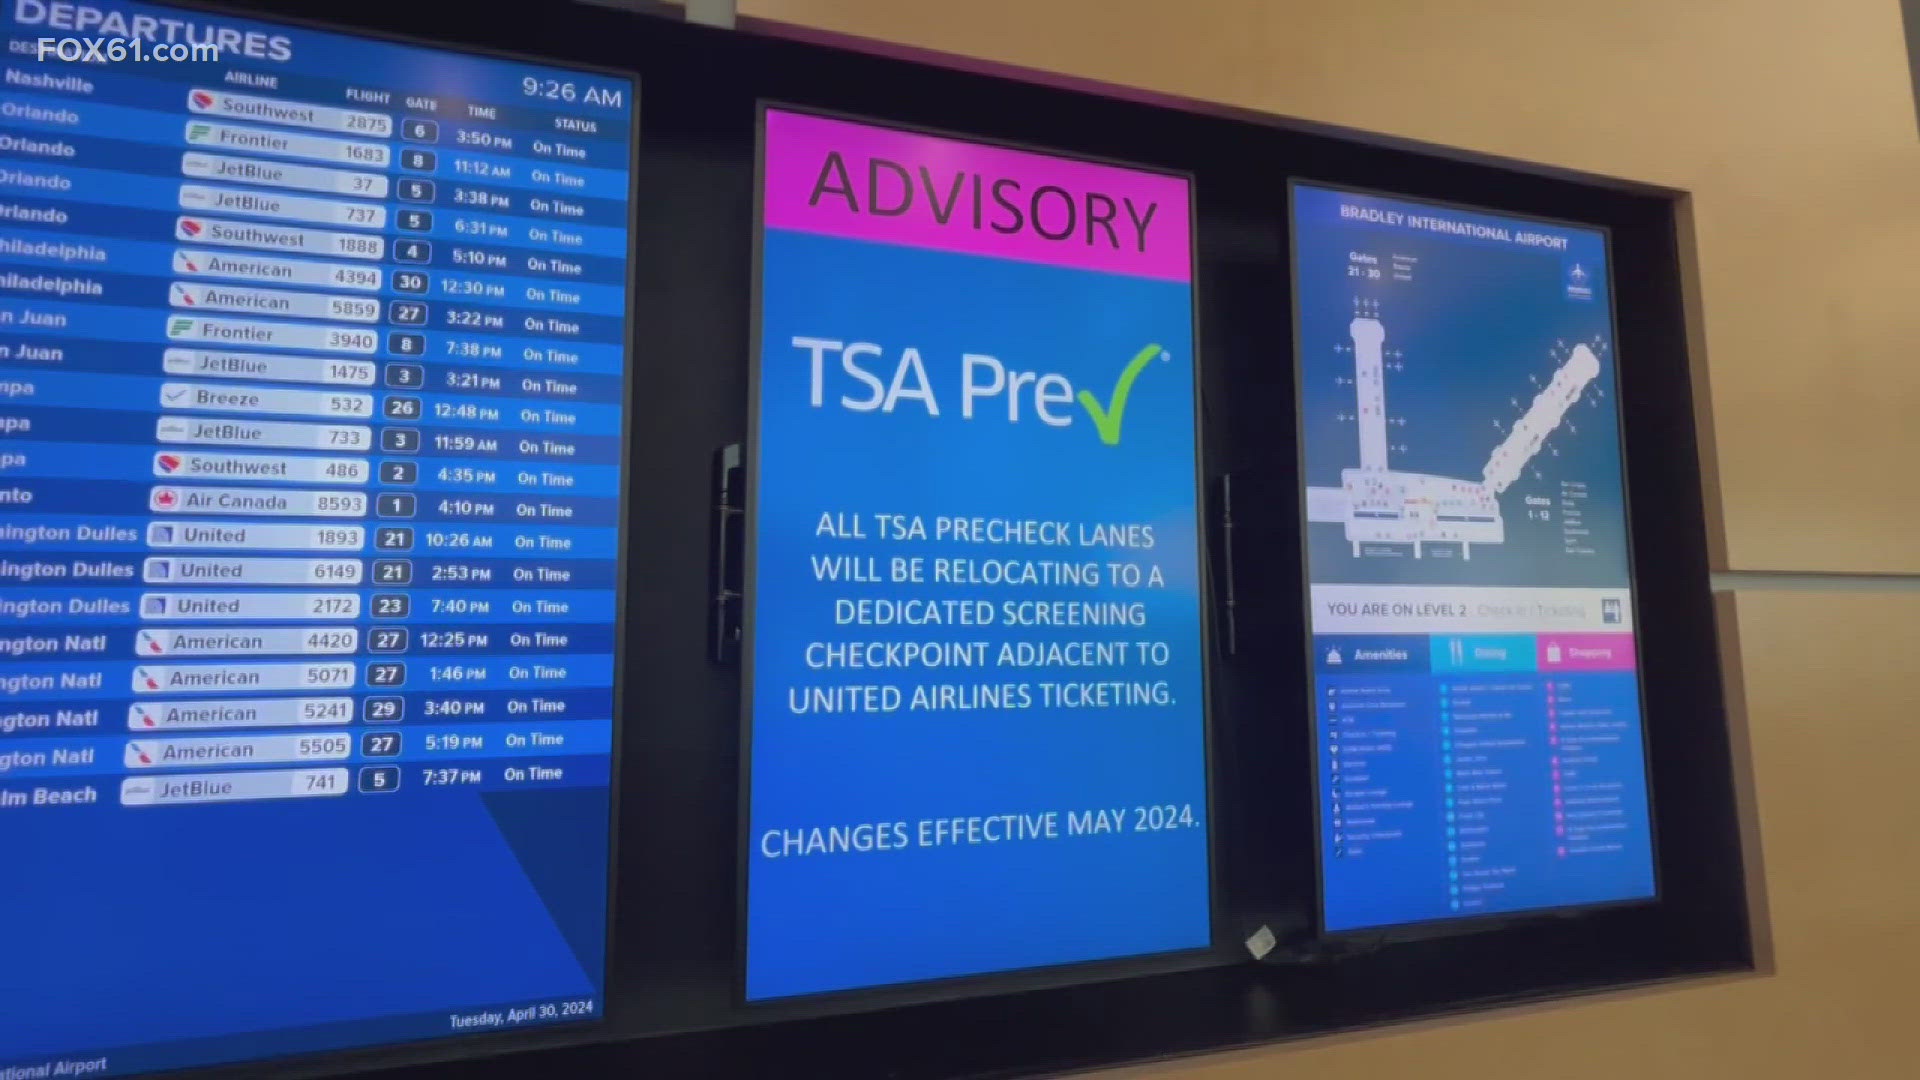 All TSA precheck lanes will be relocating to a dedicated screening checkpoint adjacent to United Airlines ticketing.